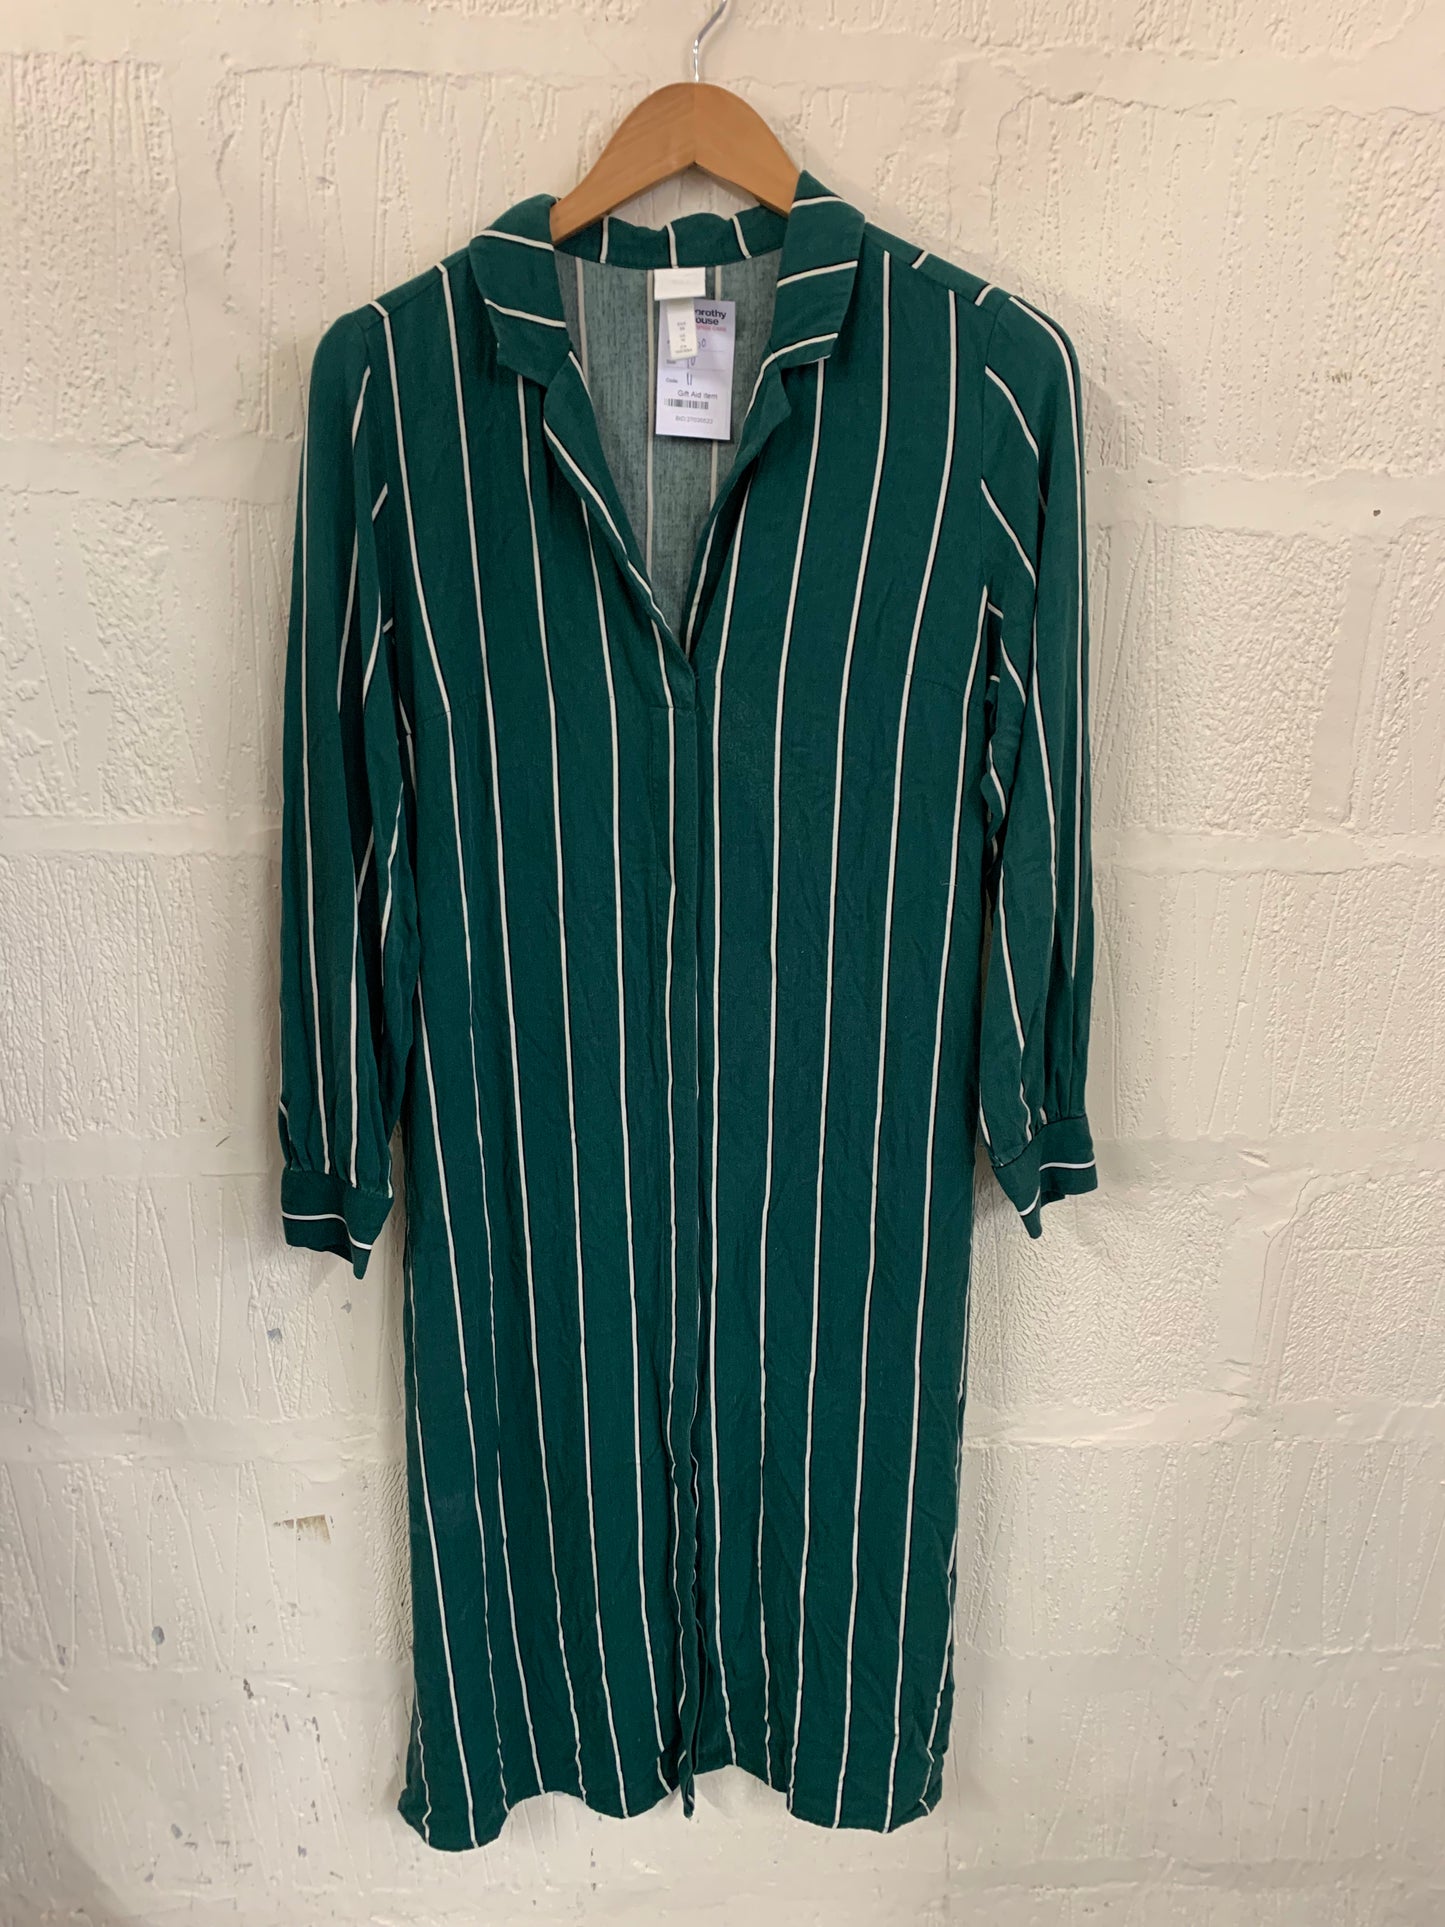 1990s Style Green with Stripe Shirt Maxi Dress Size 10